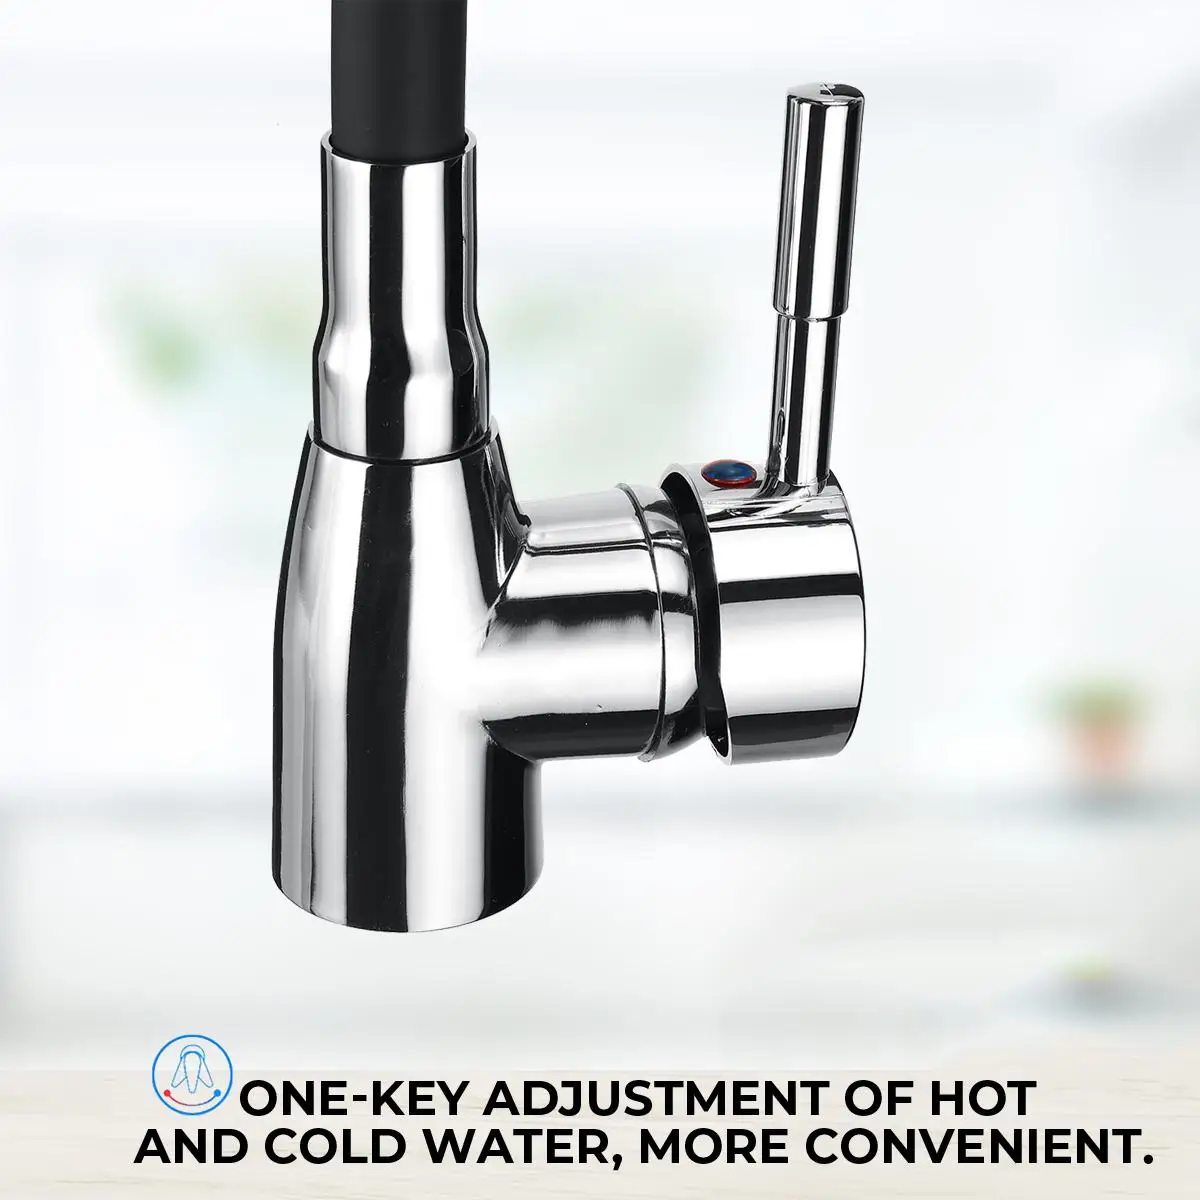 Polished Chrome Black 360Rotating Single Handle Kitchen Basin Faucet Cold and Hot Water Mixer Tap Torneira Deck Mounted enlarge